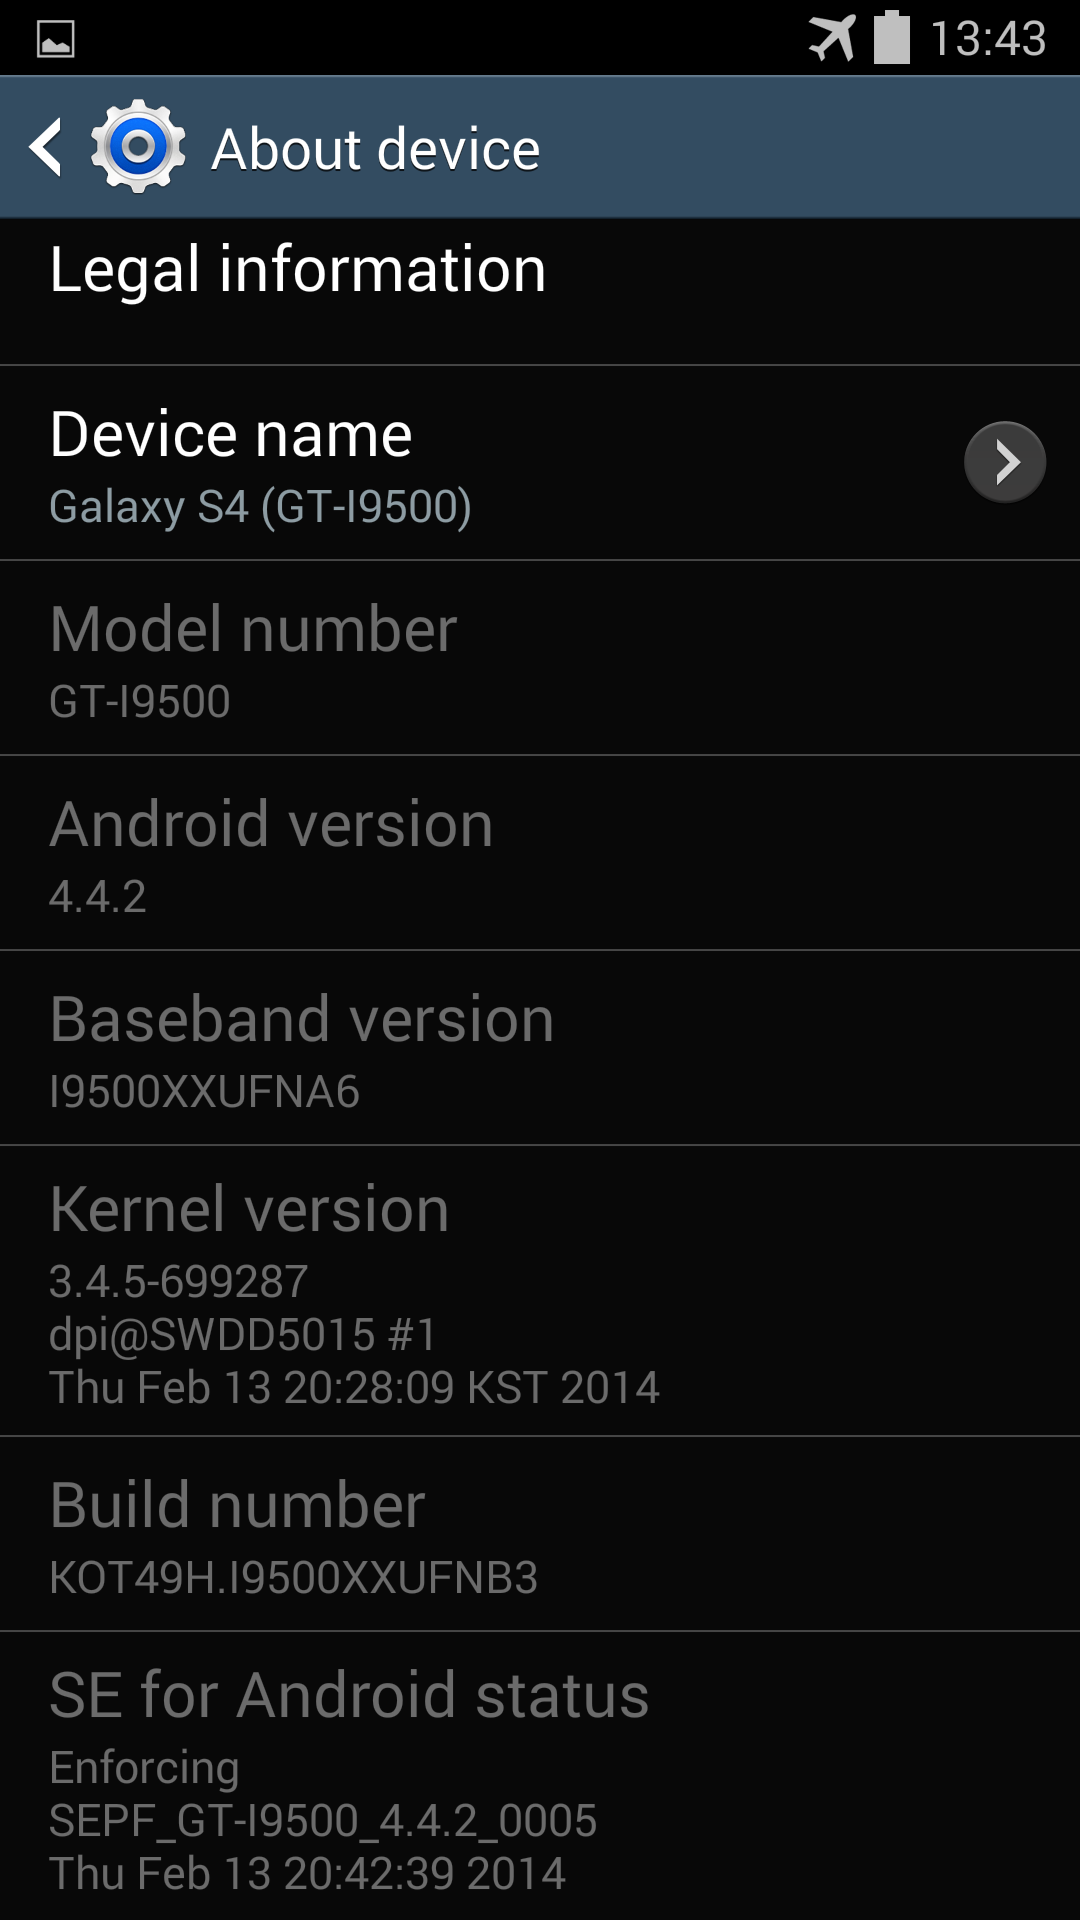 Samsung Rolls Out Android 4.4.2 I9500XXUFNB3 KitKat Update ...